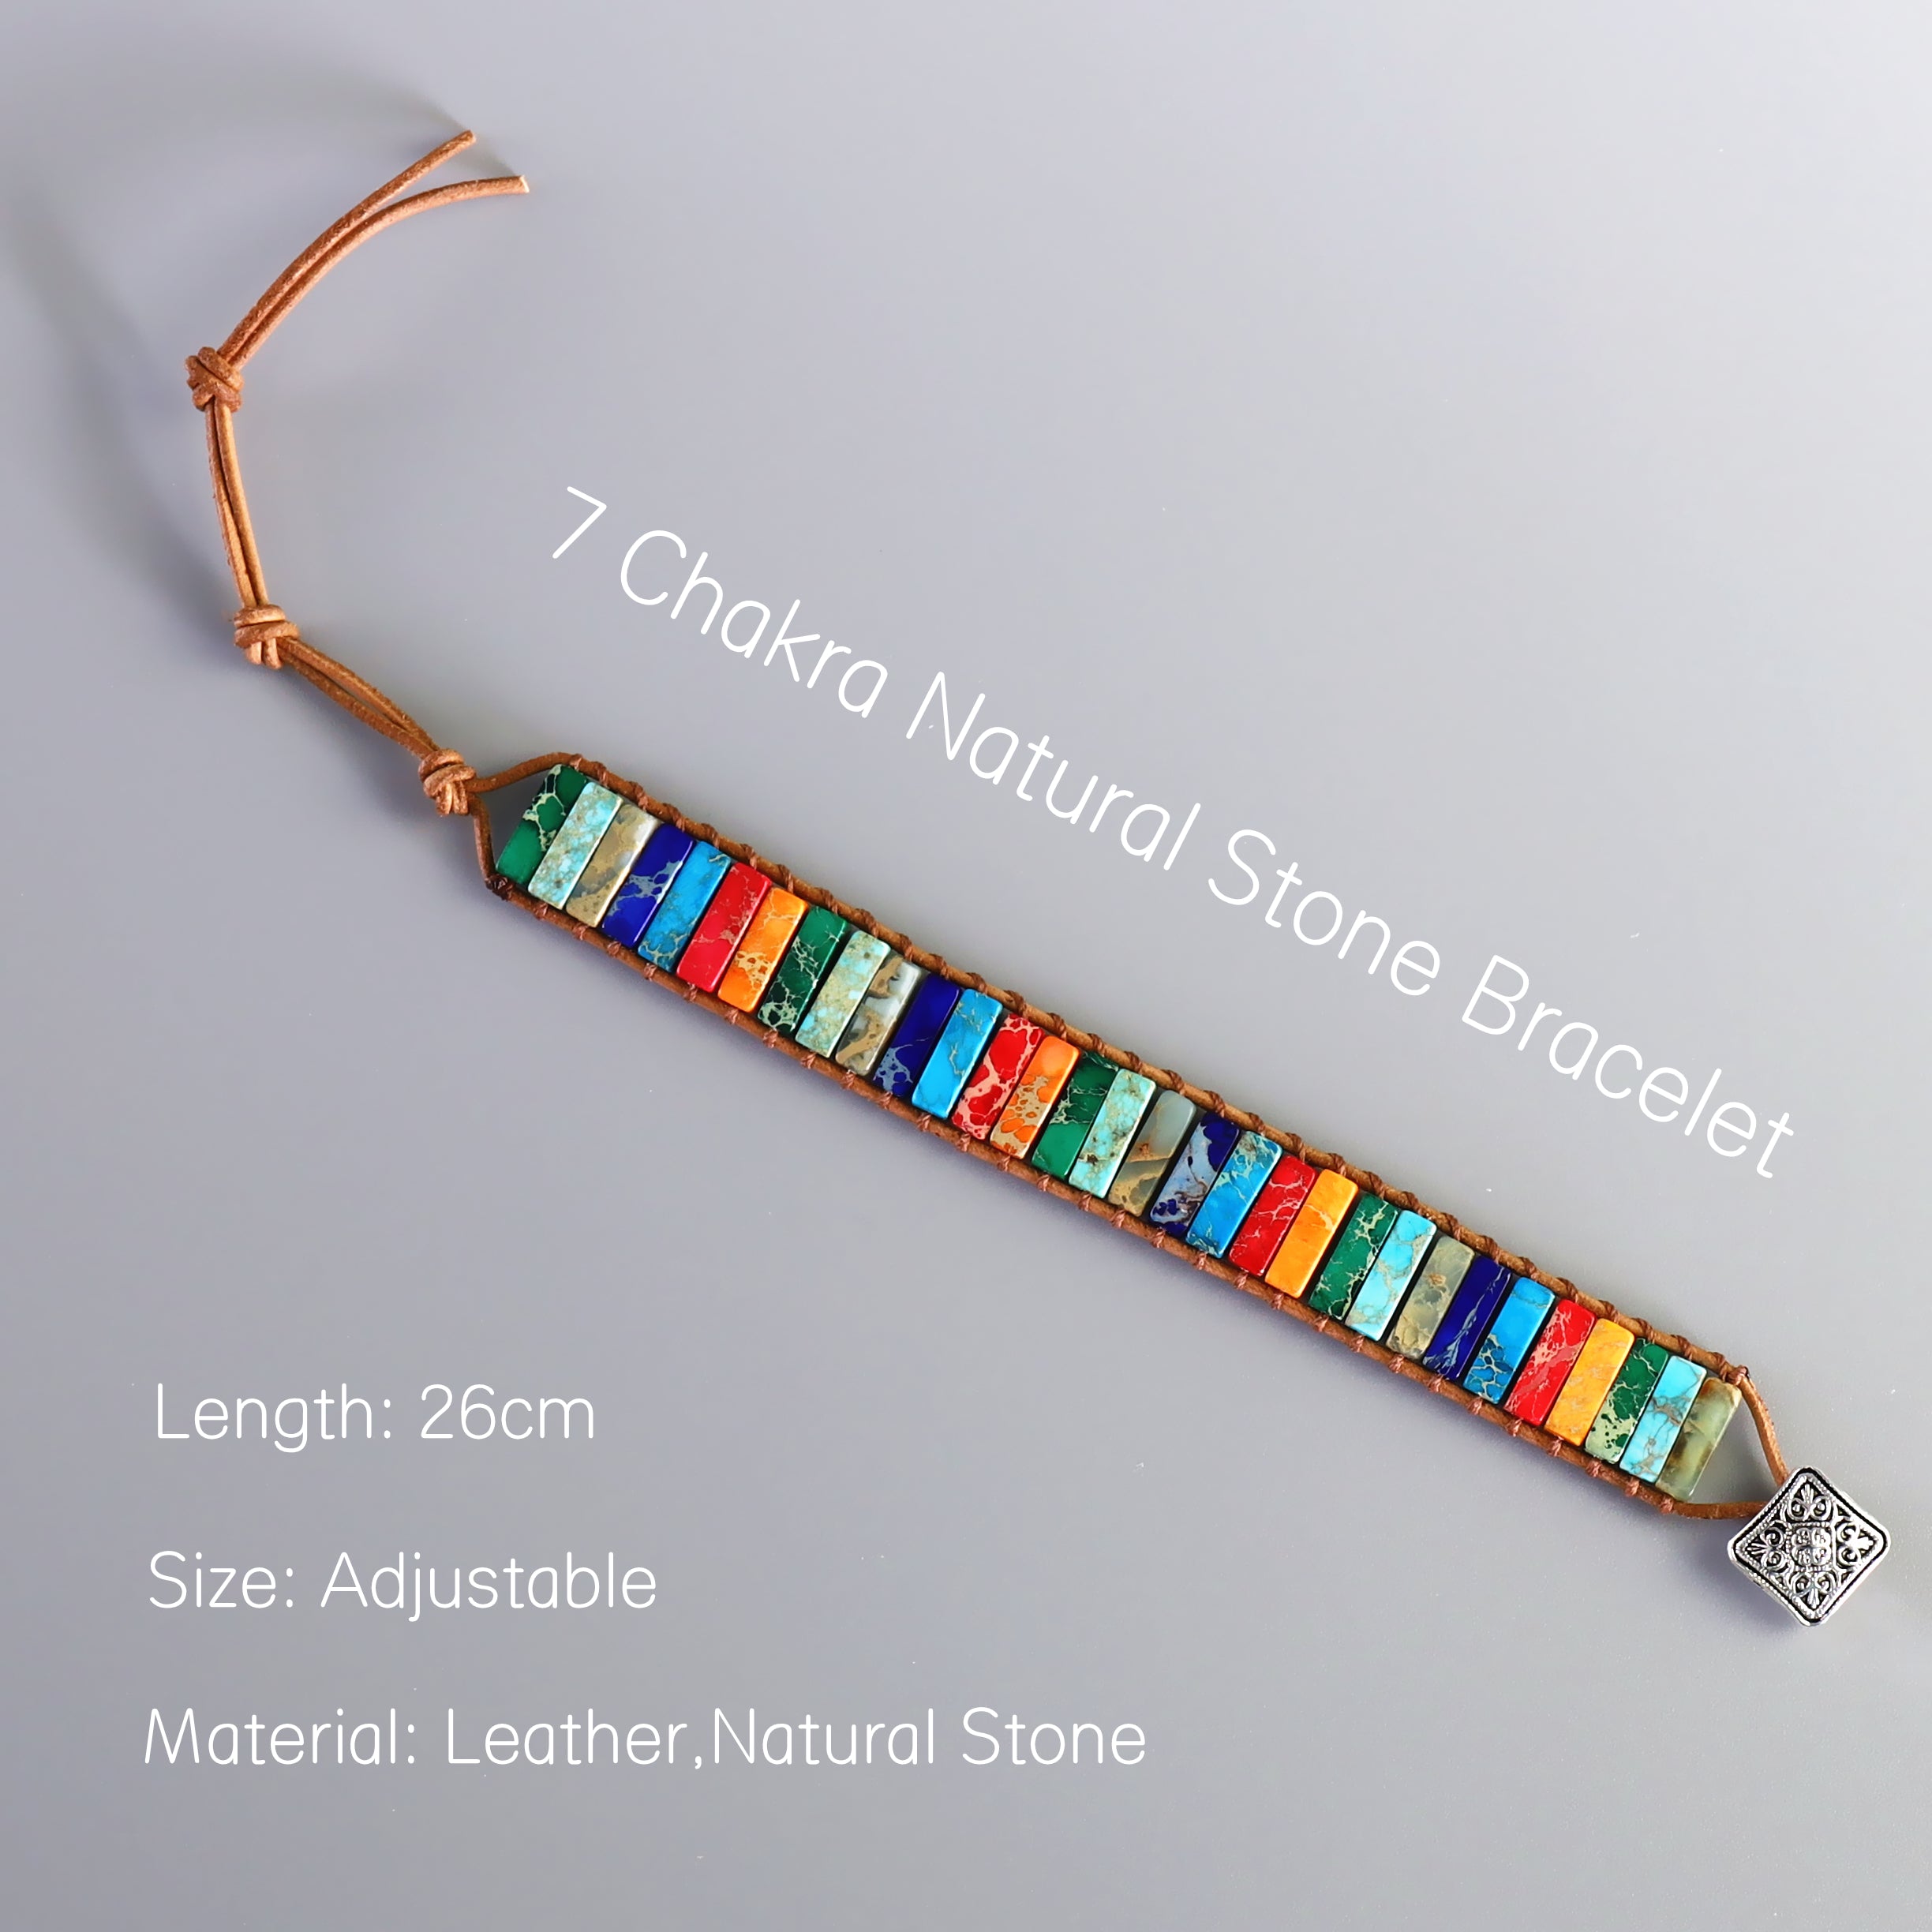 Buddhist Handcrafted Nature Sandalwood Bracelet for "Protection, Health, Balance, Energy & Wisdom" - 12 Essential Frosted Granites Crystals